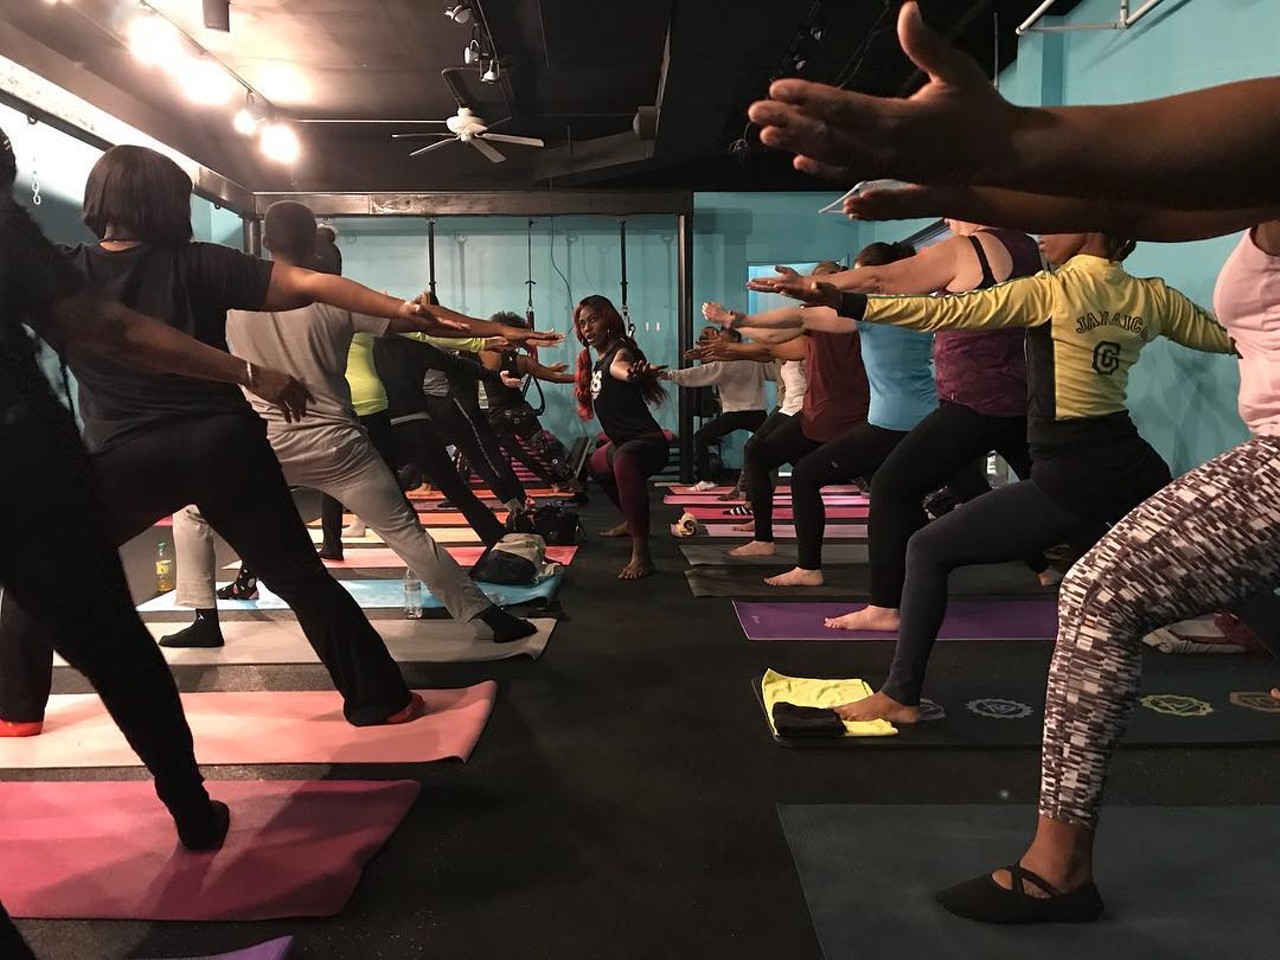 Trap Yoga 
&#147;Bodak Yellow&#148; is the new tranquil mix of waterfalls and windchimes and nasty is the new namaste. From Cardi B to Migos and Lil Boosie, twerk your way to wellness with this fresh take on ye&#146; olde yoga classes. 
UFit2, 16915 Livernois Ave., Detroit; 313-270-7425;  Facebook 
Photo via Facebook